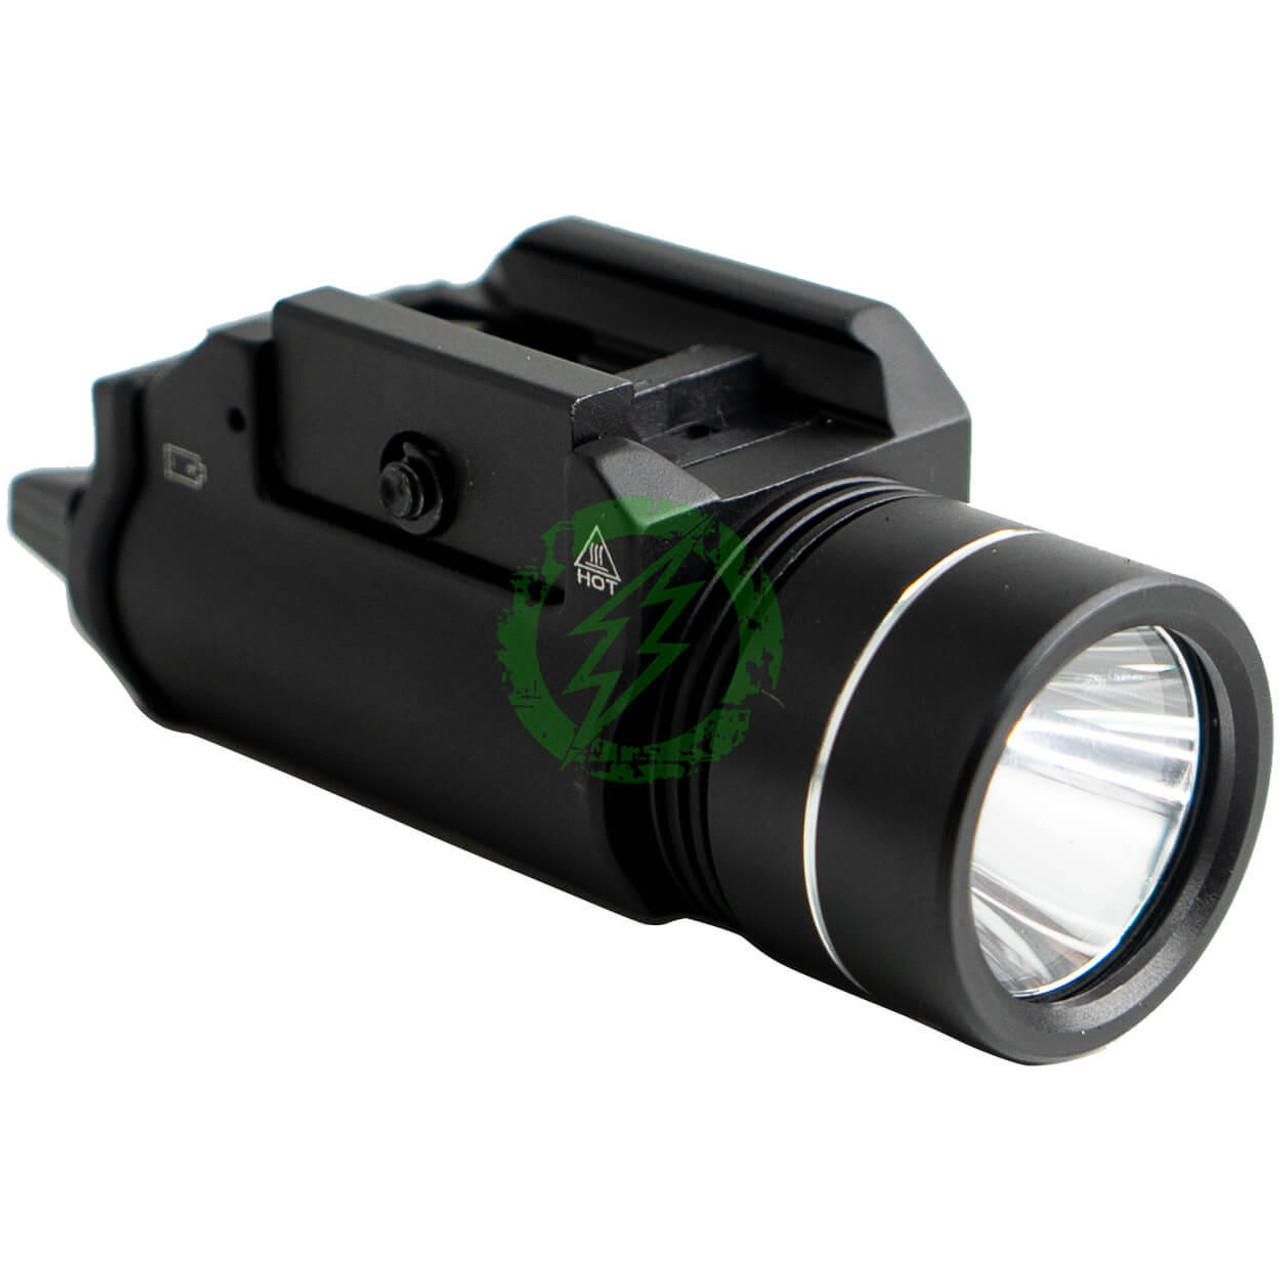  High Power Airsoft HPA HG-2 Tactical Pistol Light Black Constant On & Strobe 1000 Lumens 